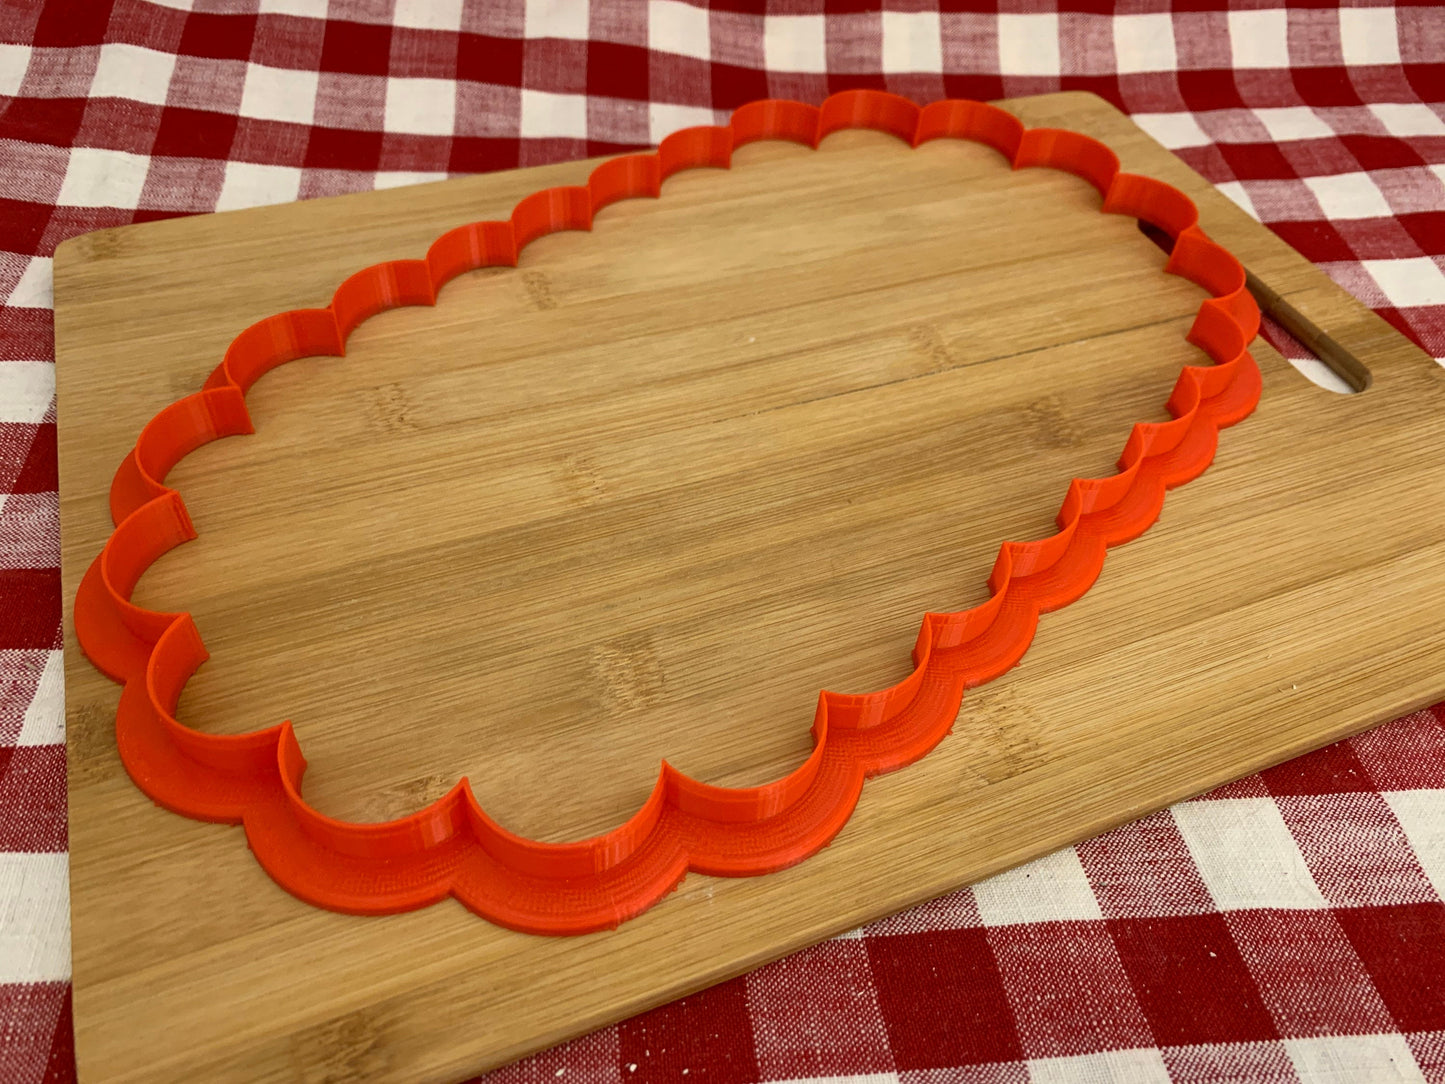 Scalloped Rounded Rectangle, XL Clay Cutter - Plastic 3d printed, pottery tool, multiple sizes